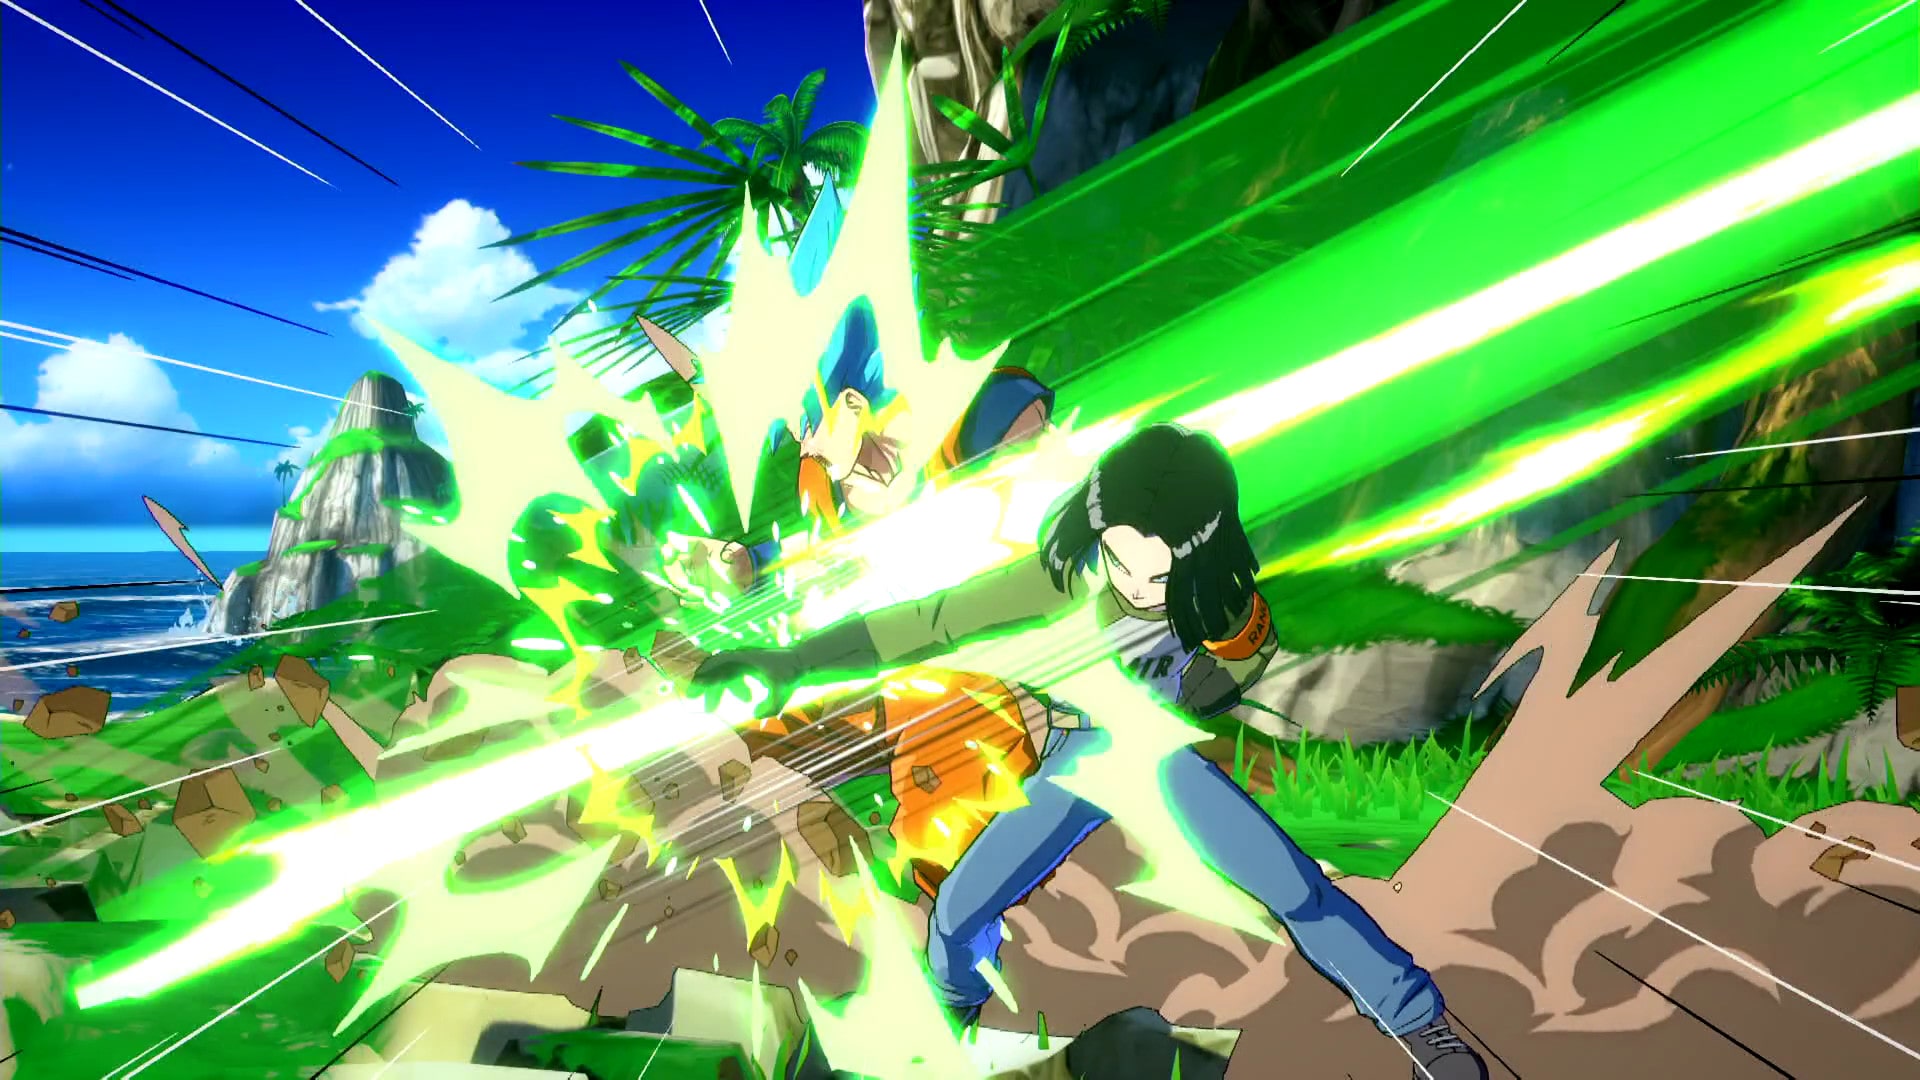 DRAGON BALL FIGHTERZ - Android 17